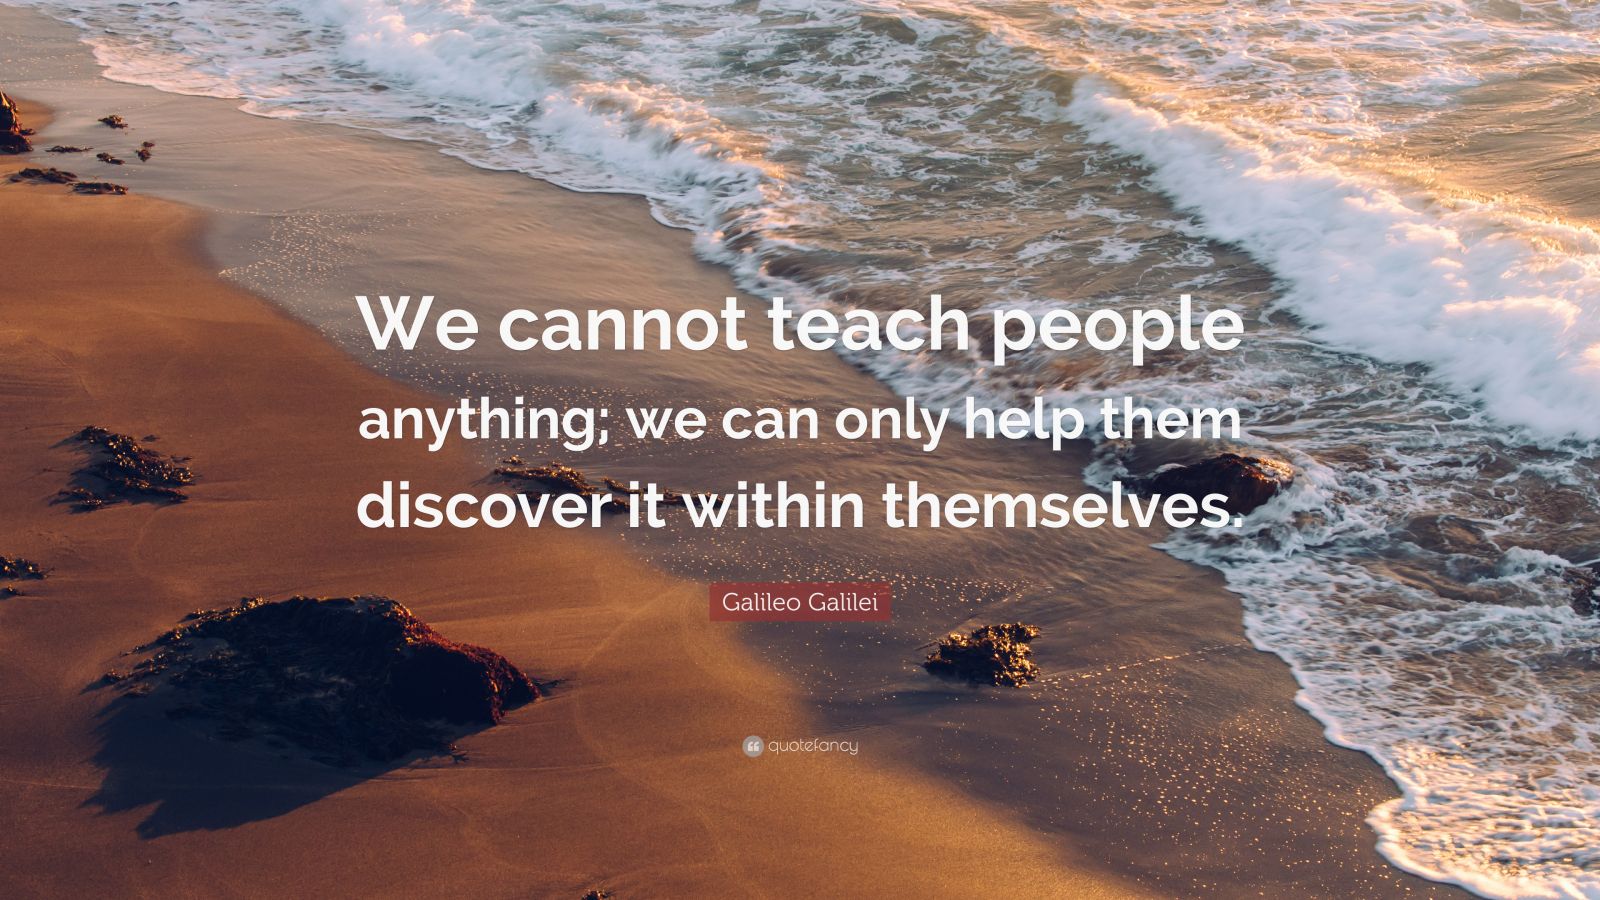 Galileo Galilei Quote: “We cannot teach people anything; we can only